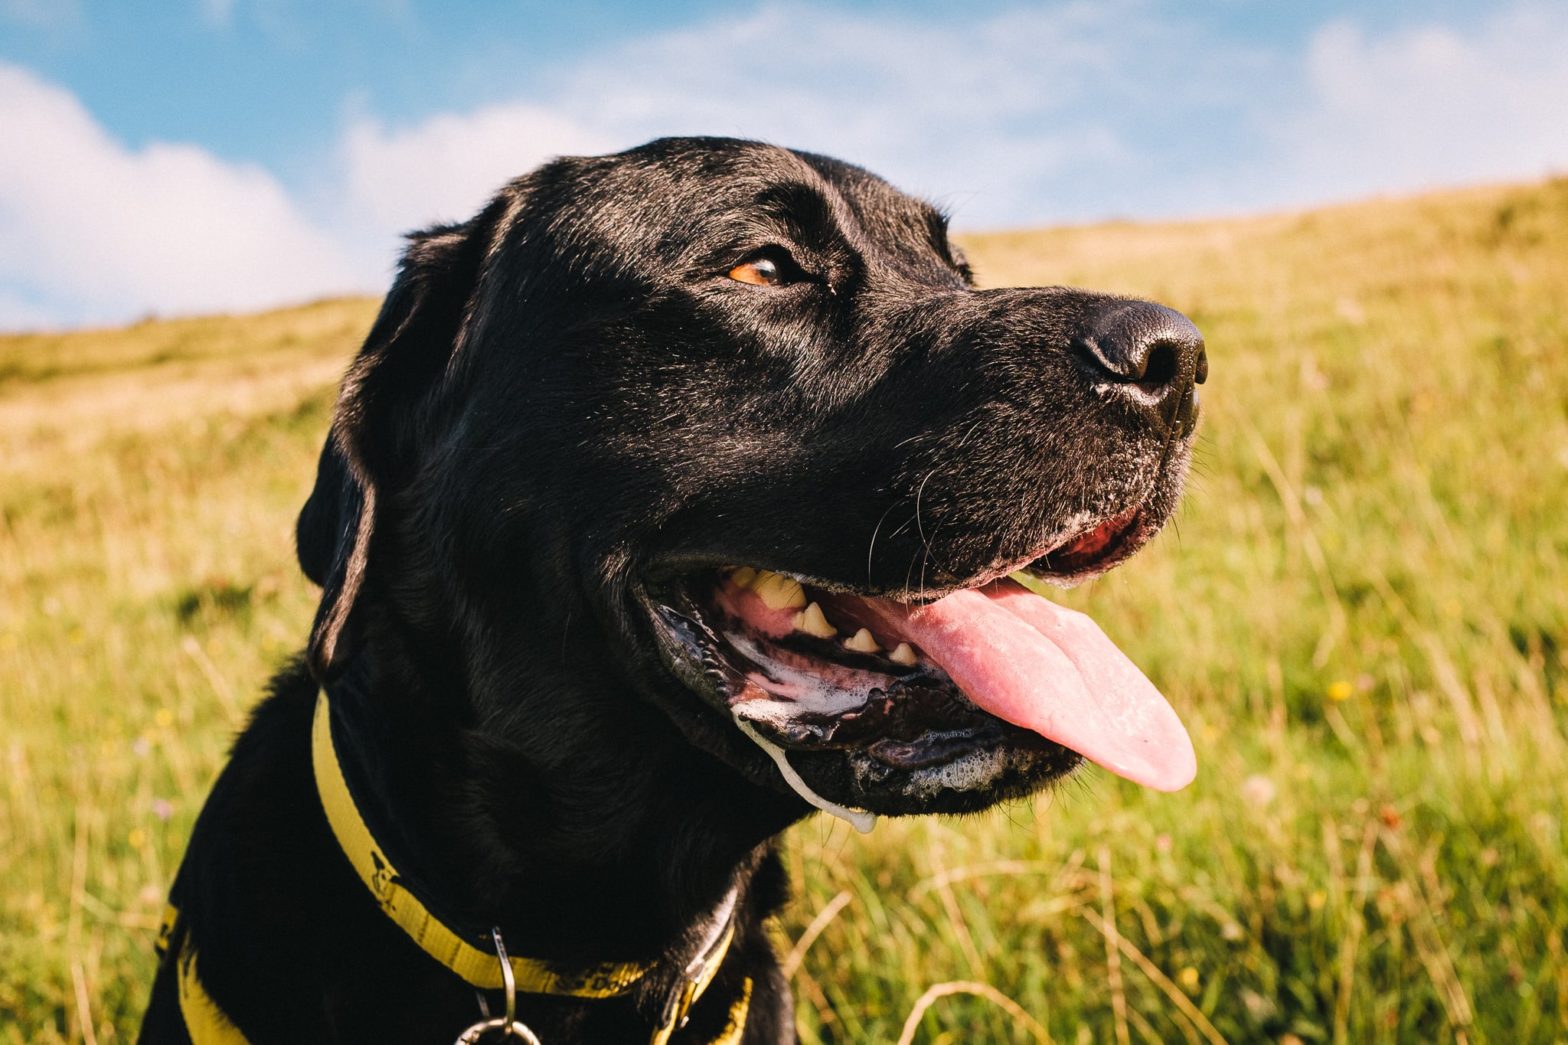 Closeup of a large black dog's head wearing a yellow collar on a sunny afternoon against a backdrop of grass and a blue sky